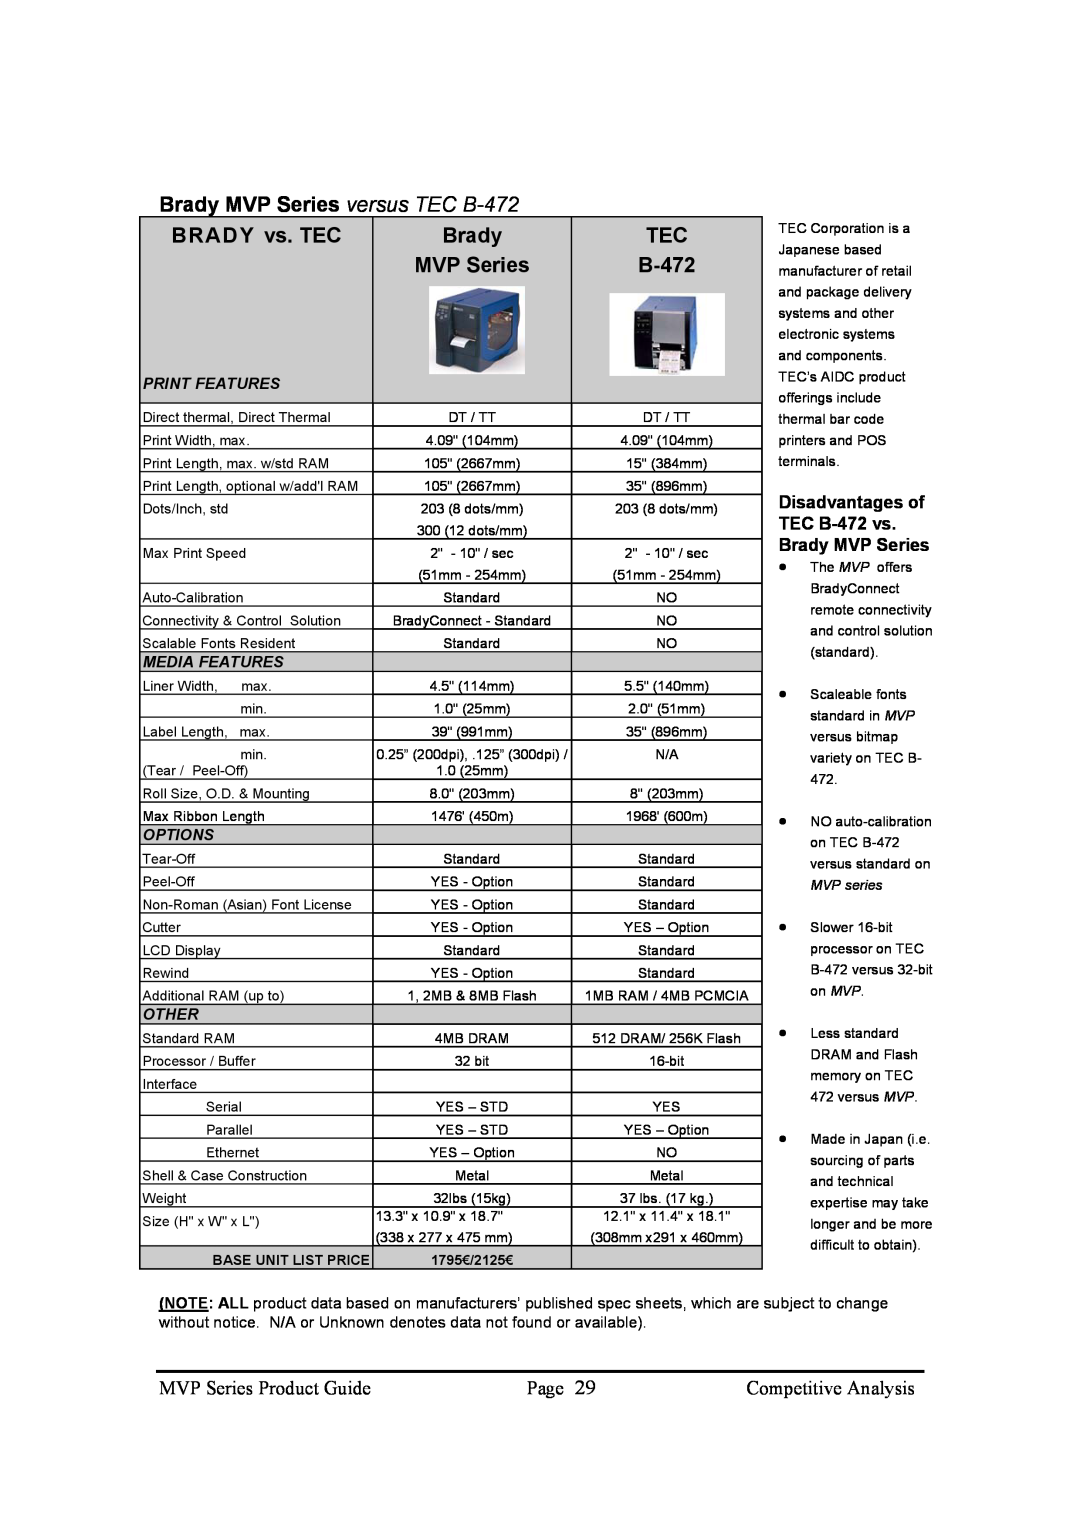 Brady 300MVP MVP Series Product Guide, Page, Competitive Analysis, Disadvantages of TEC B-472 vs. Brady MVP Series, Other 